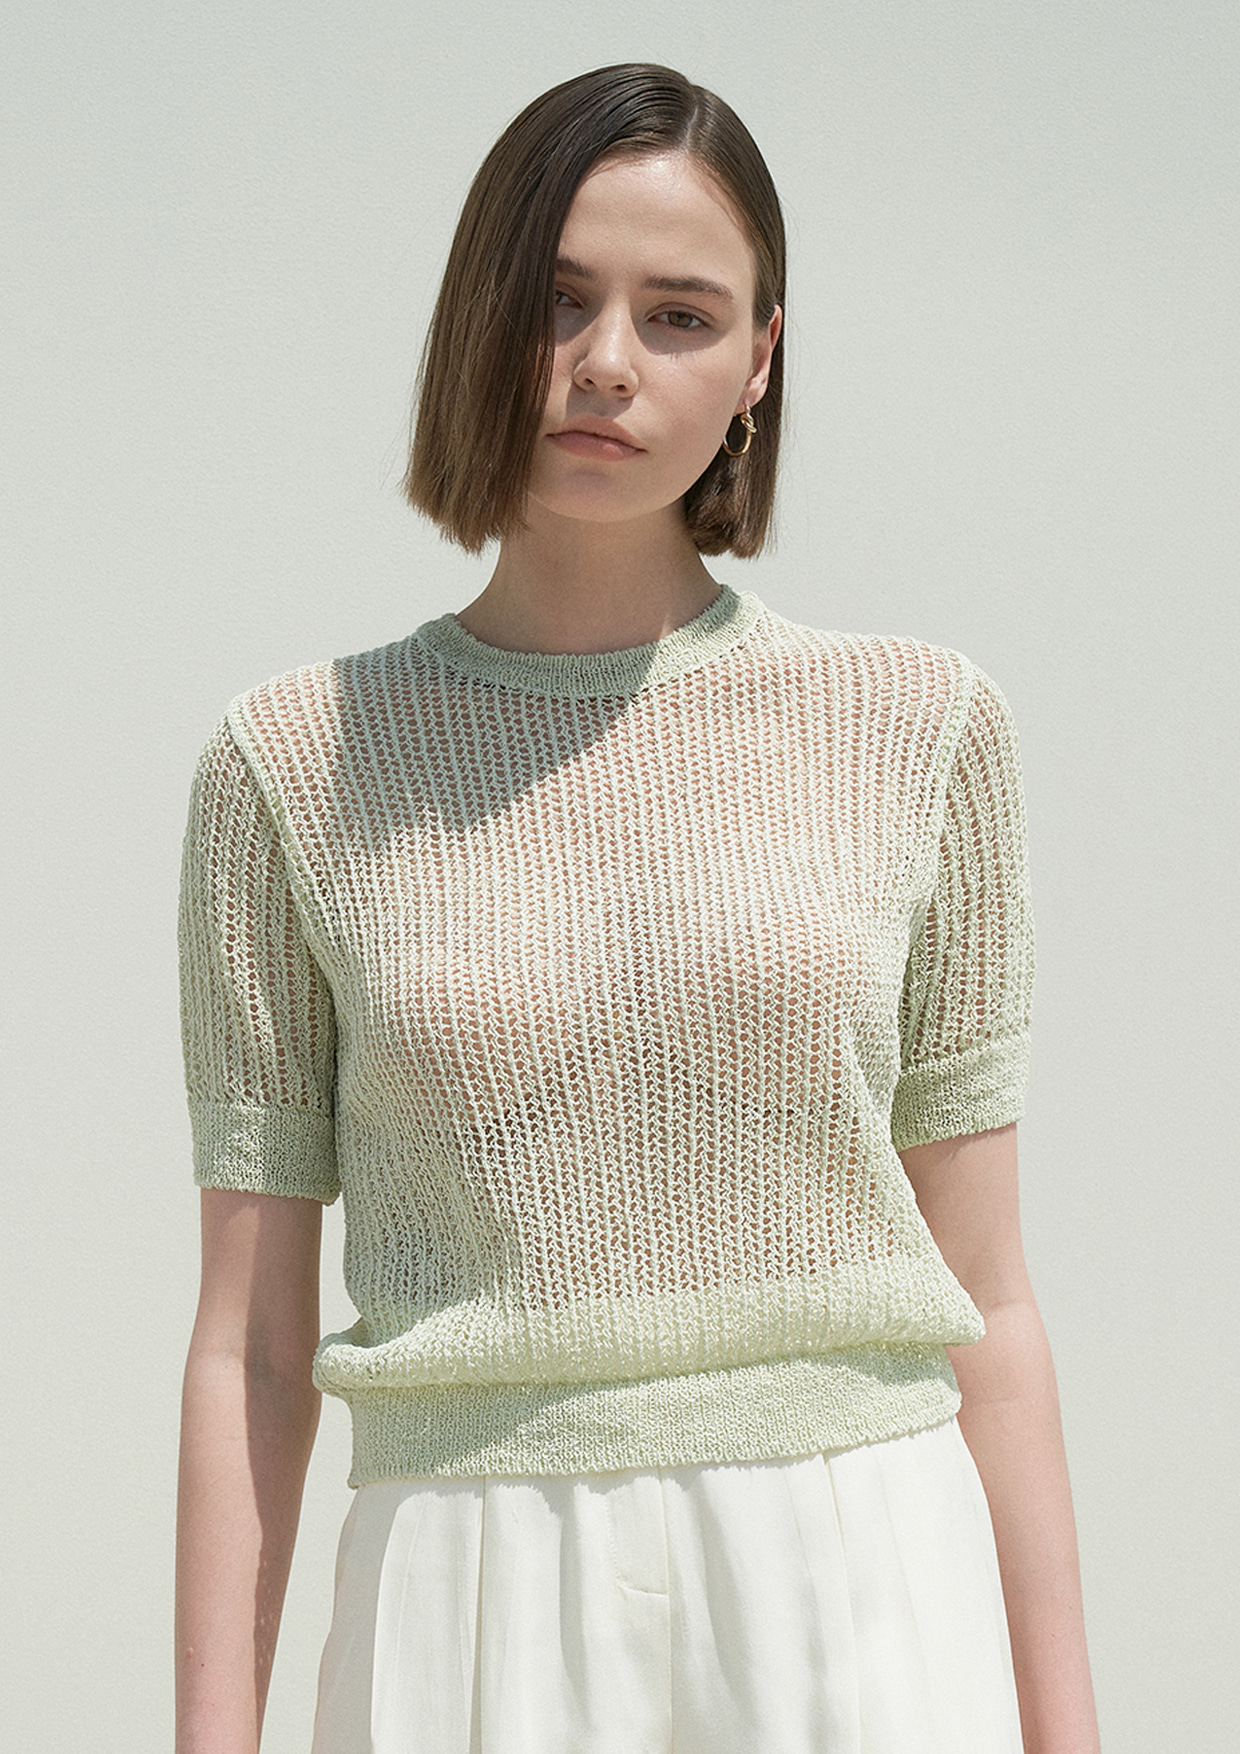 Netted Half Sleeves Knit